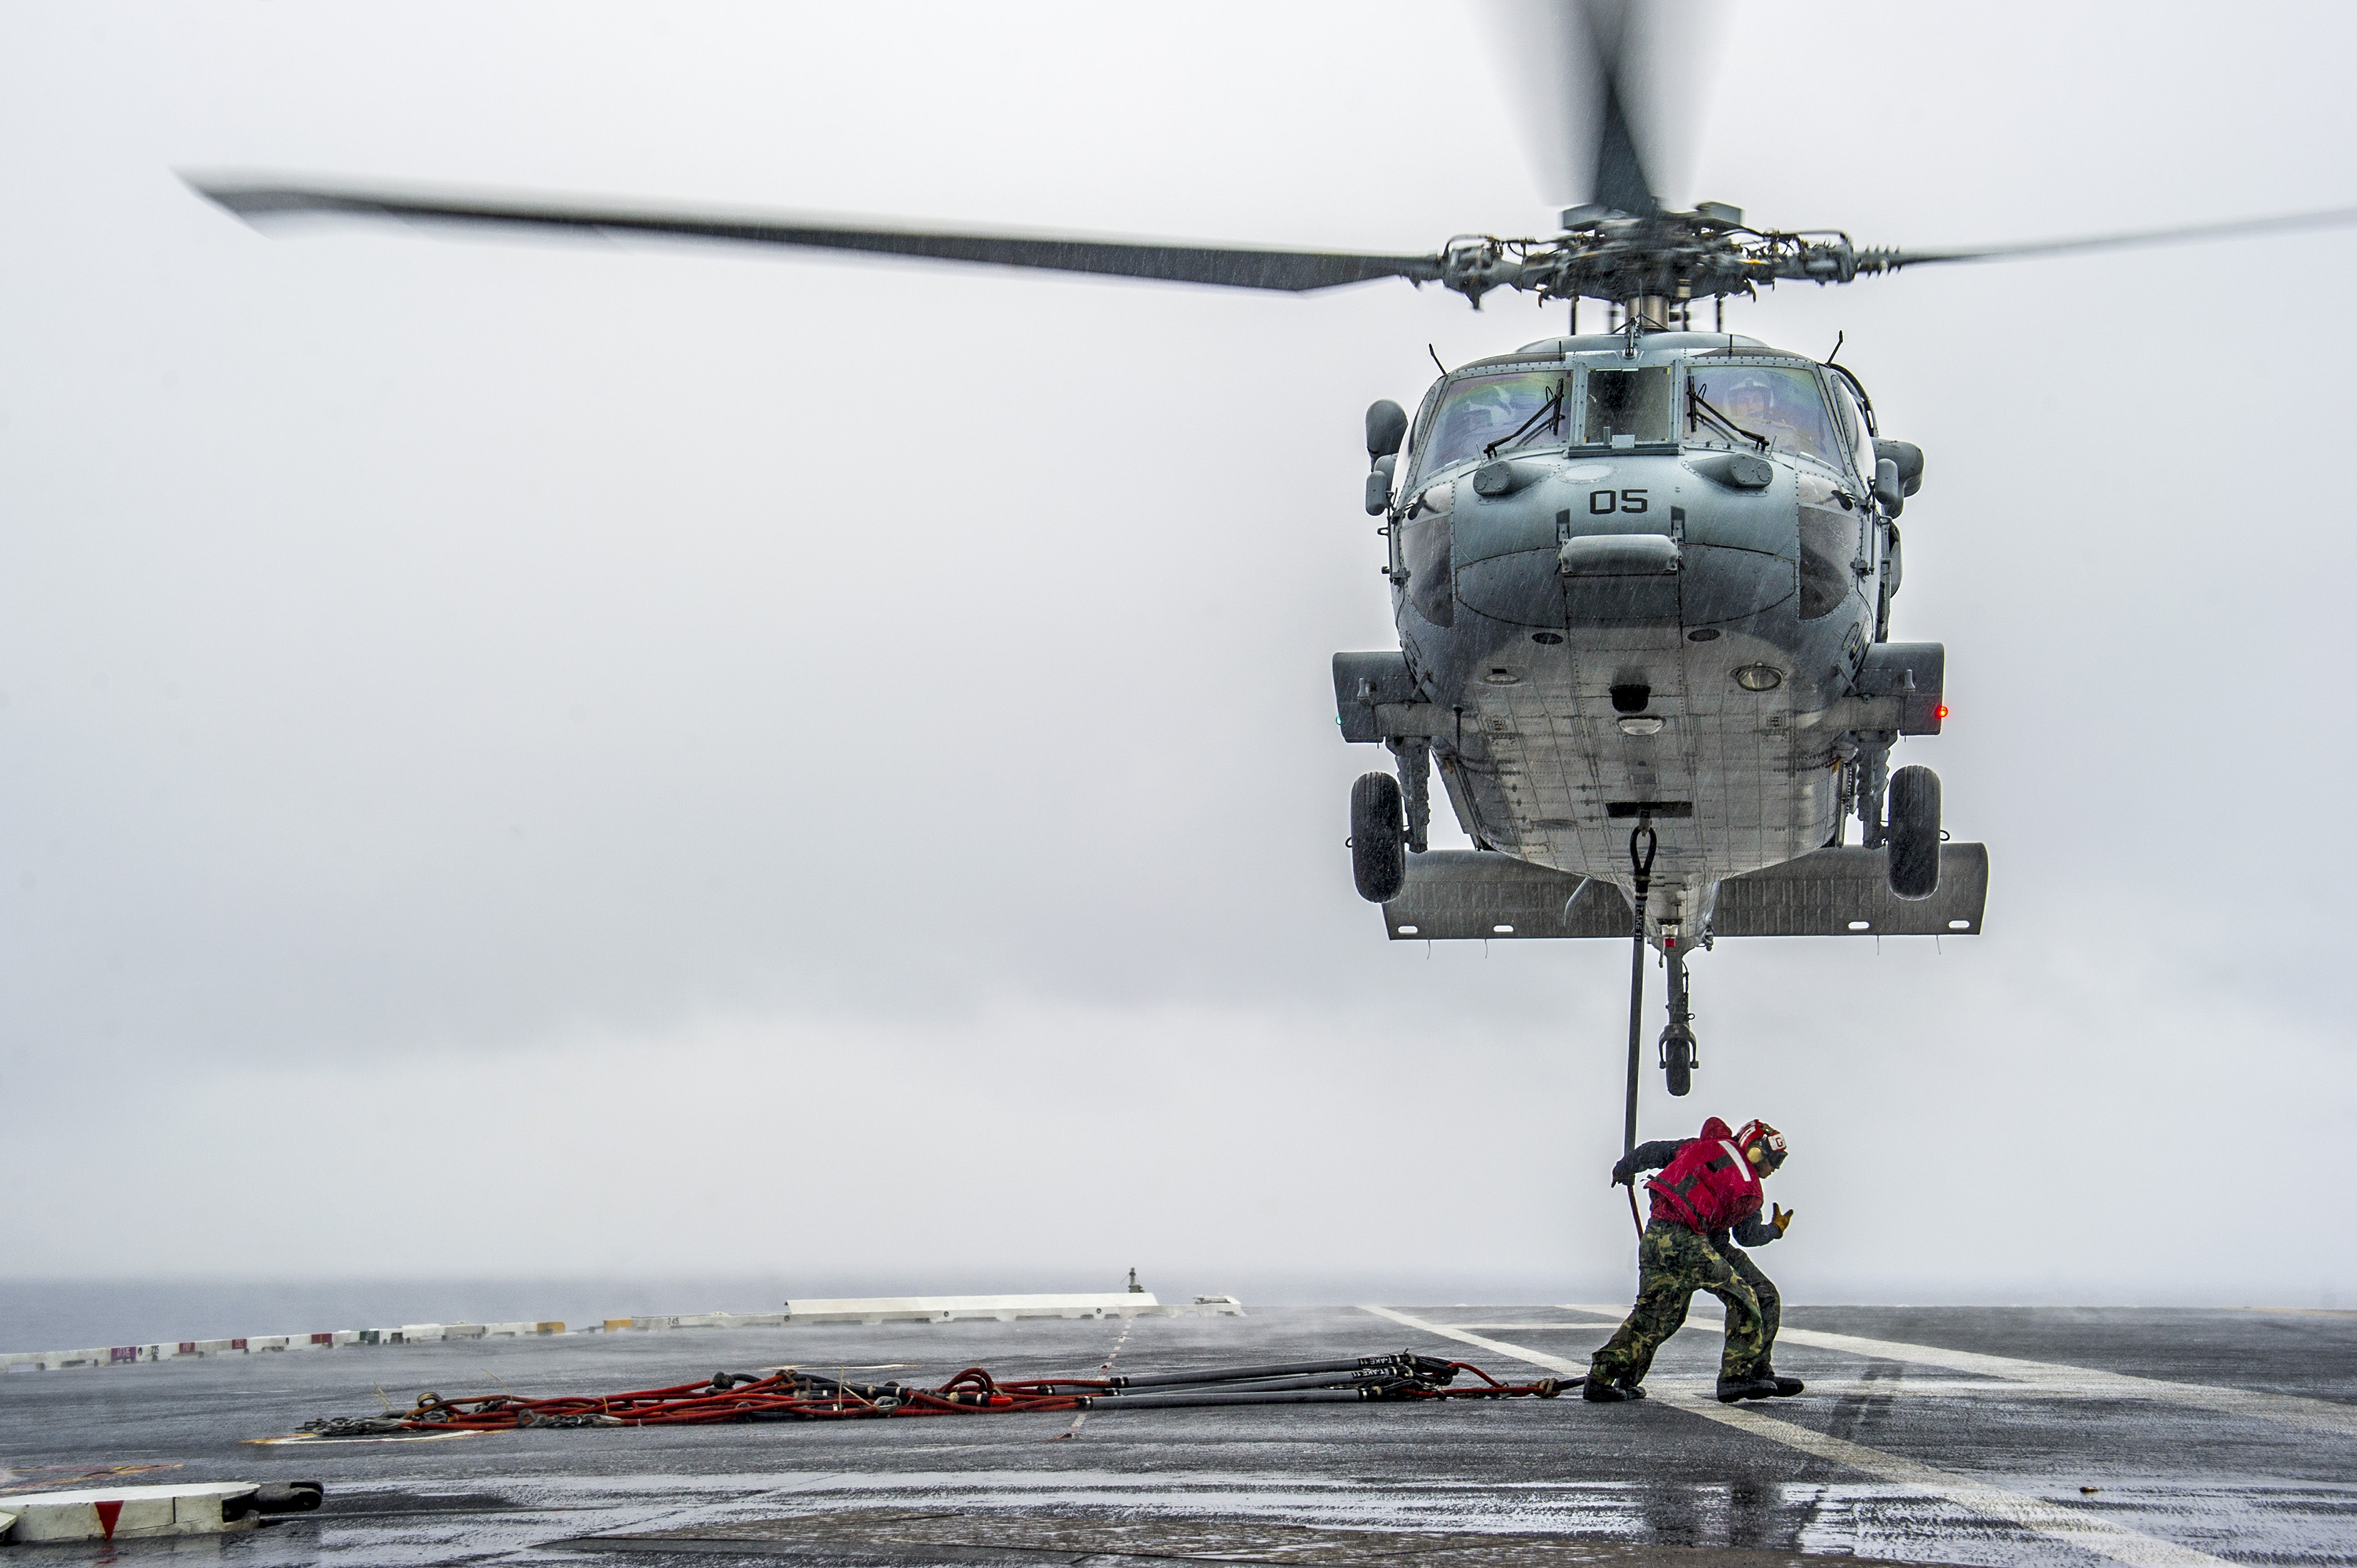 MH-60S helicopter from the Island Knights of Helicopter Sea Combat Squadron (HSC) 25 on May 30, 2014. US Navy Photo